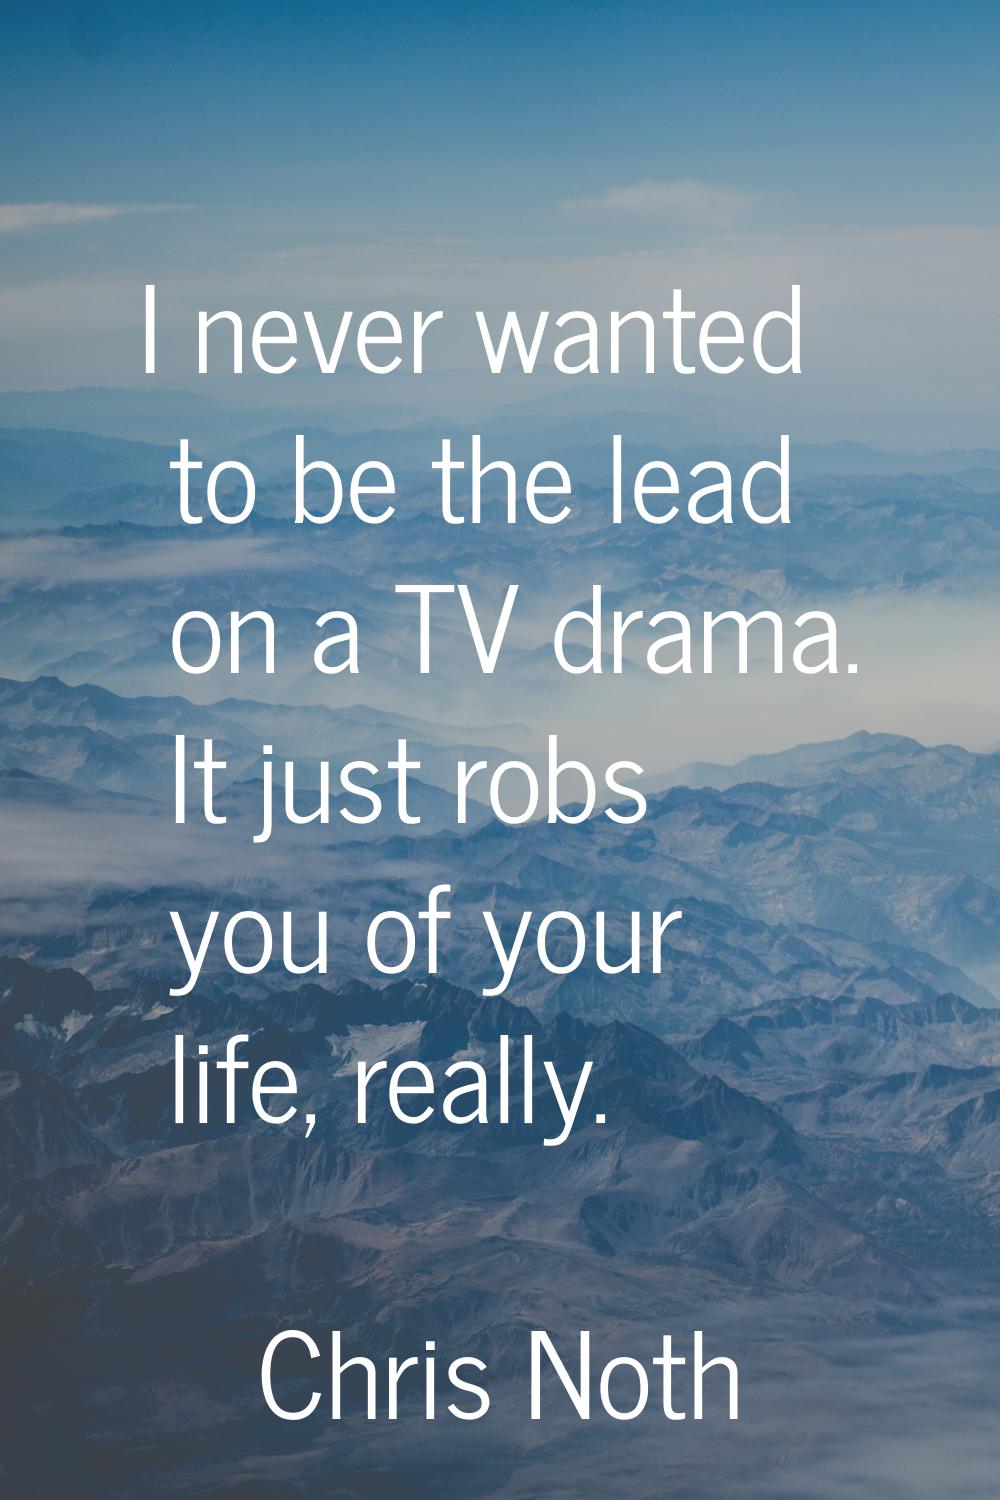 I never wanted to be the lead on a TV drama. It just robs you of your life, really.